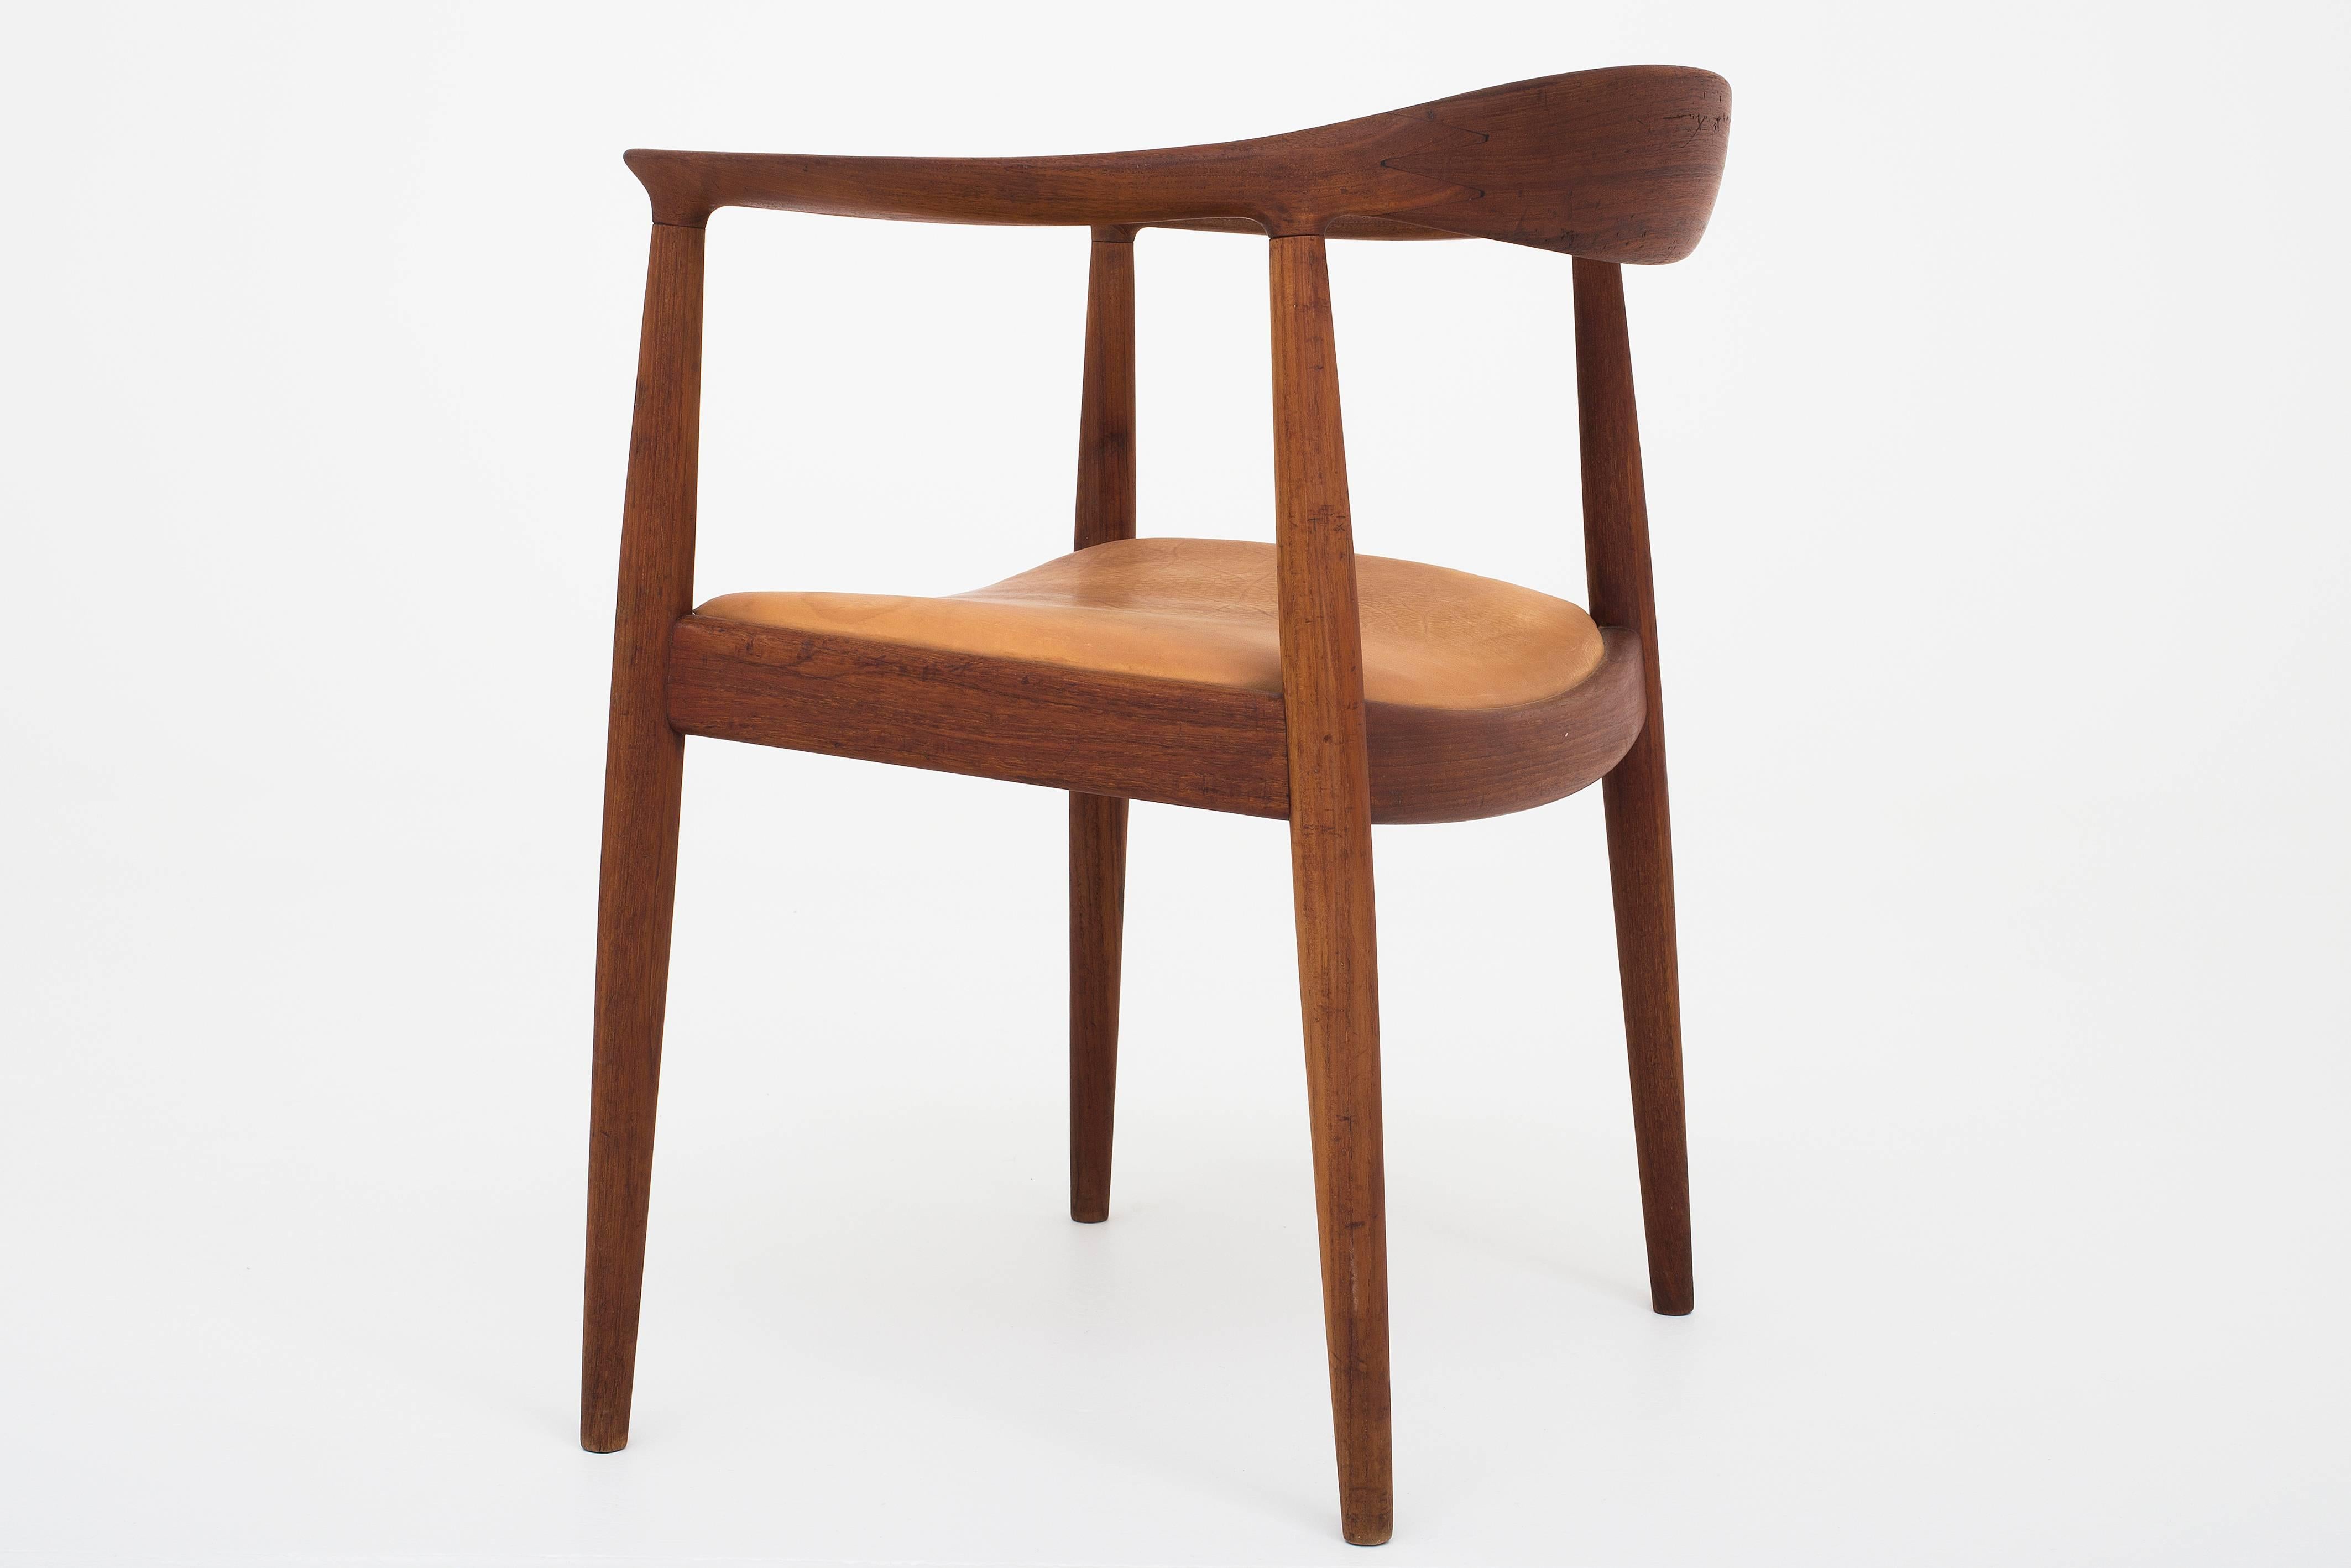 JH 503, 'The Chair' in teak and vegetal leather.